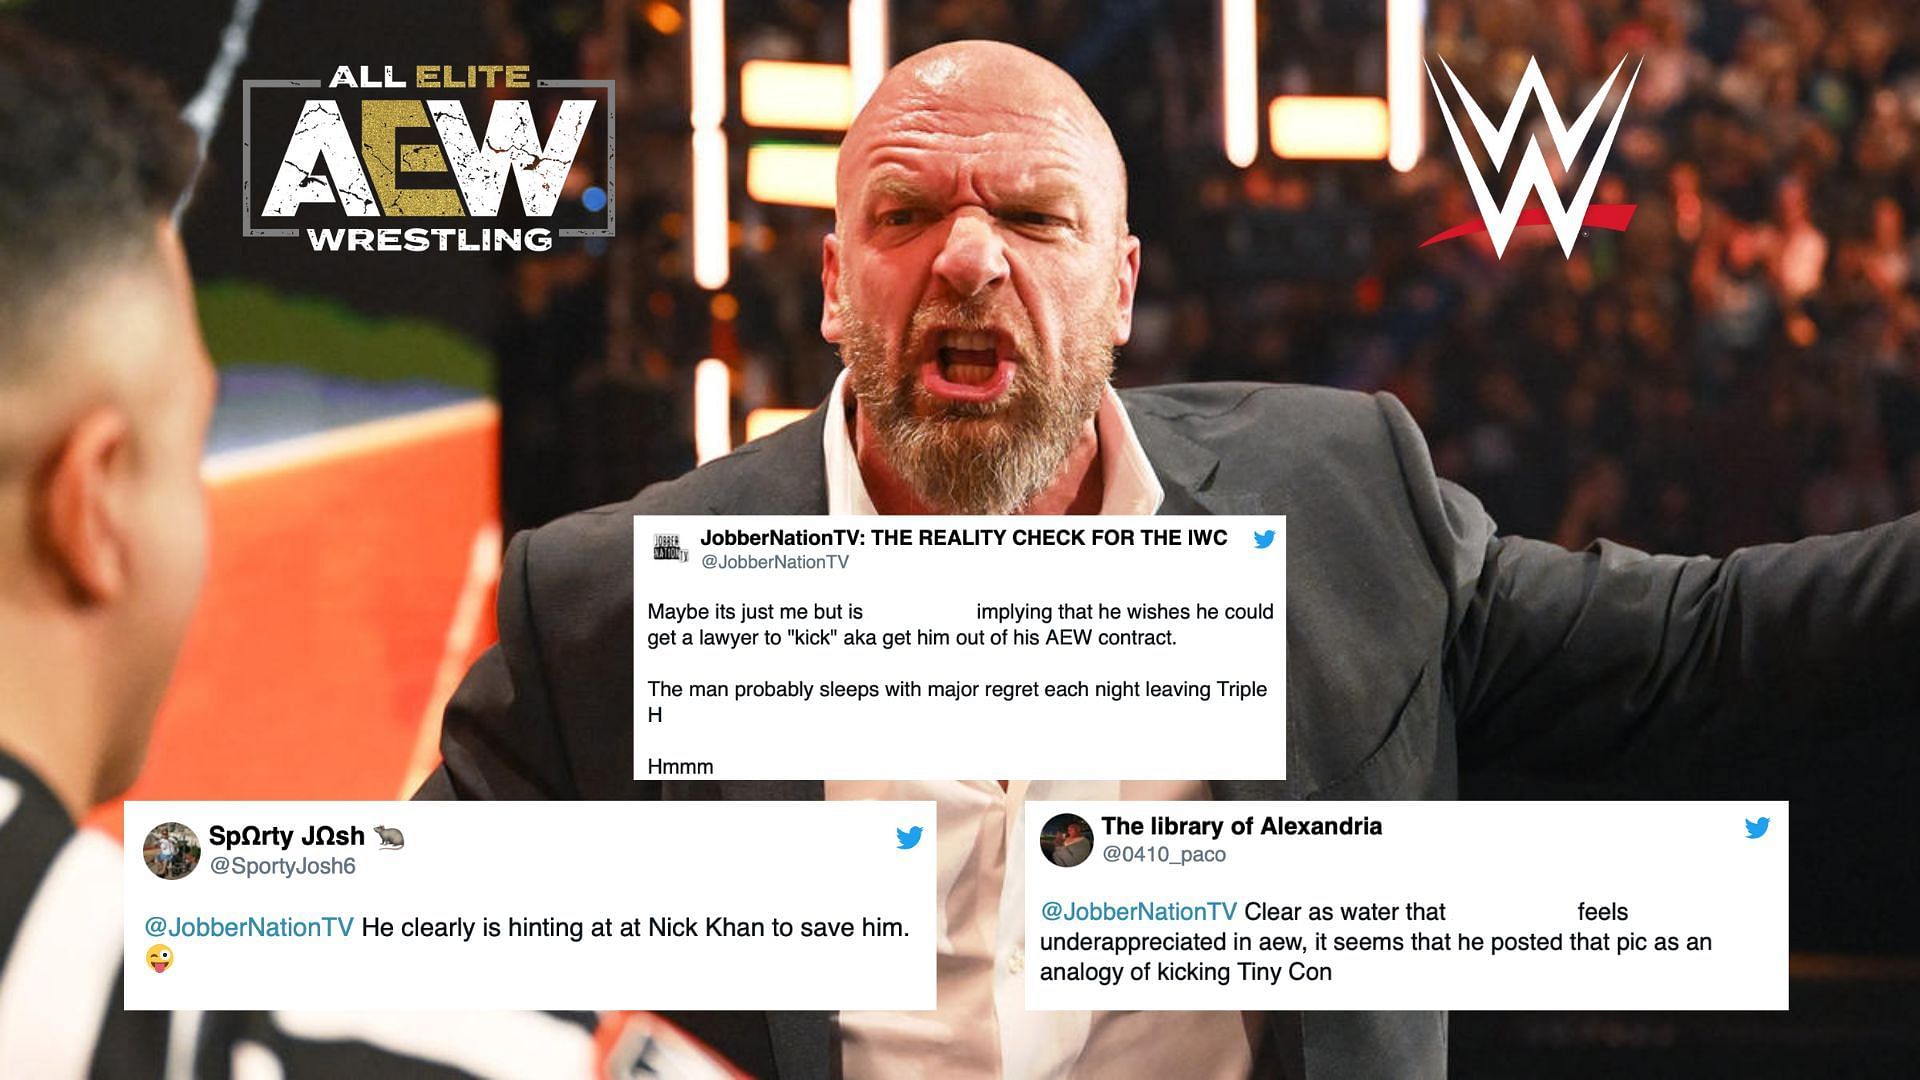 Could we see a top AEW star jump ship to WWE under Triple H